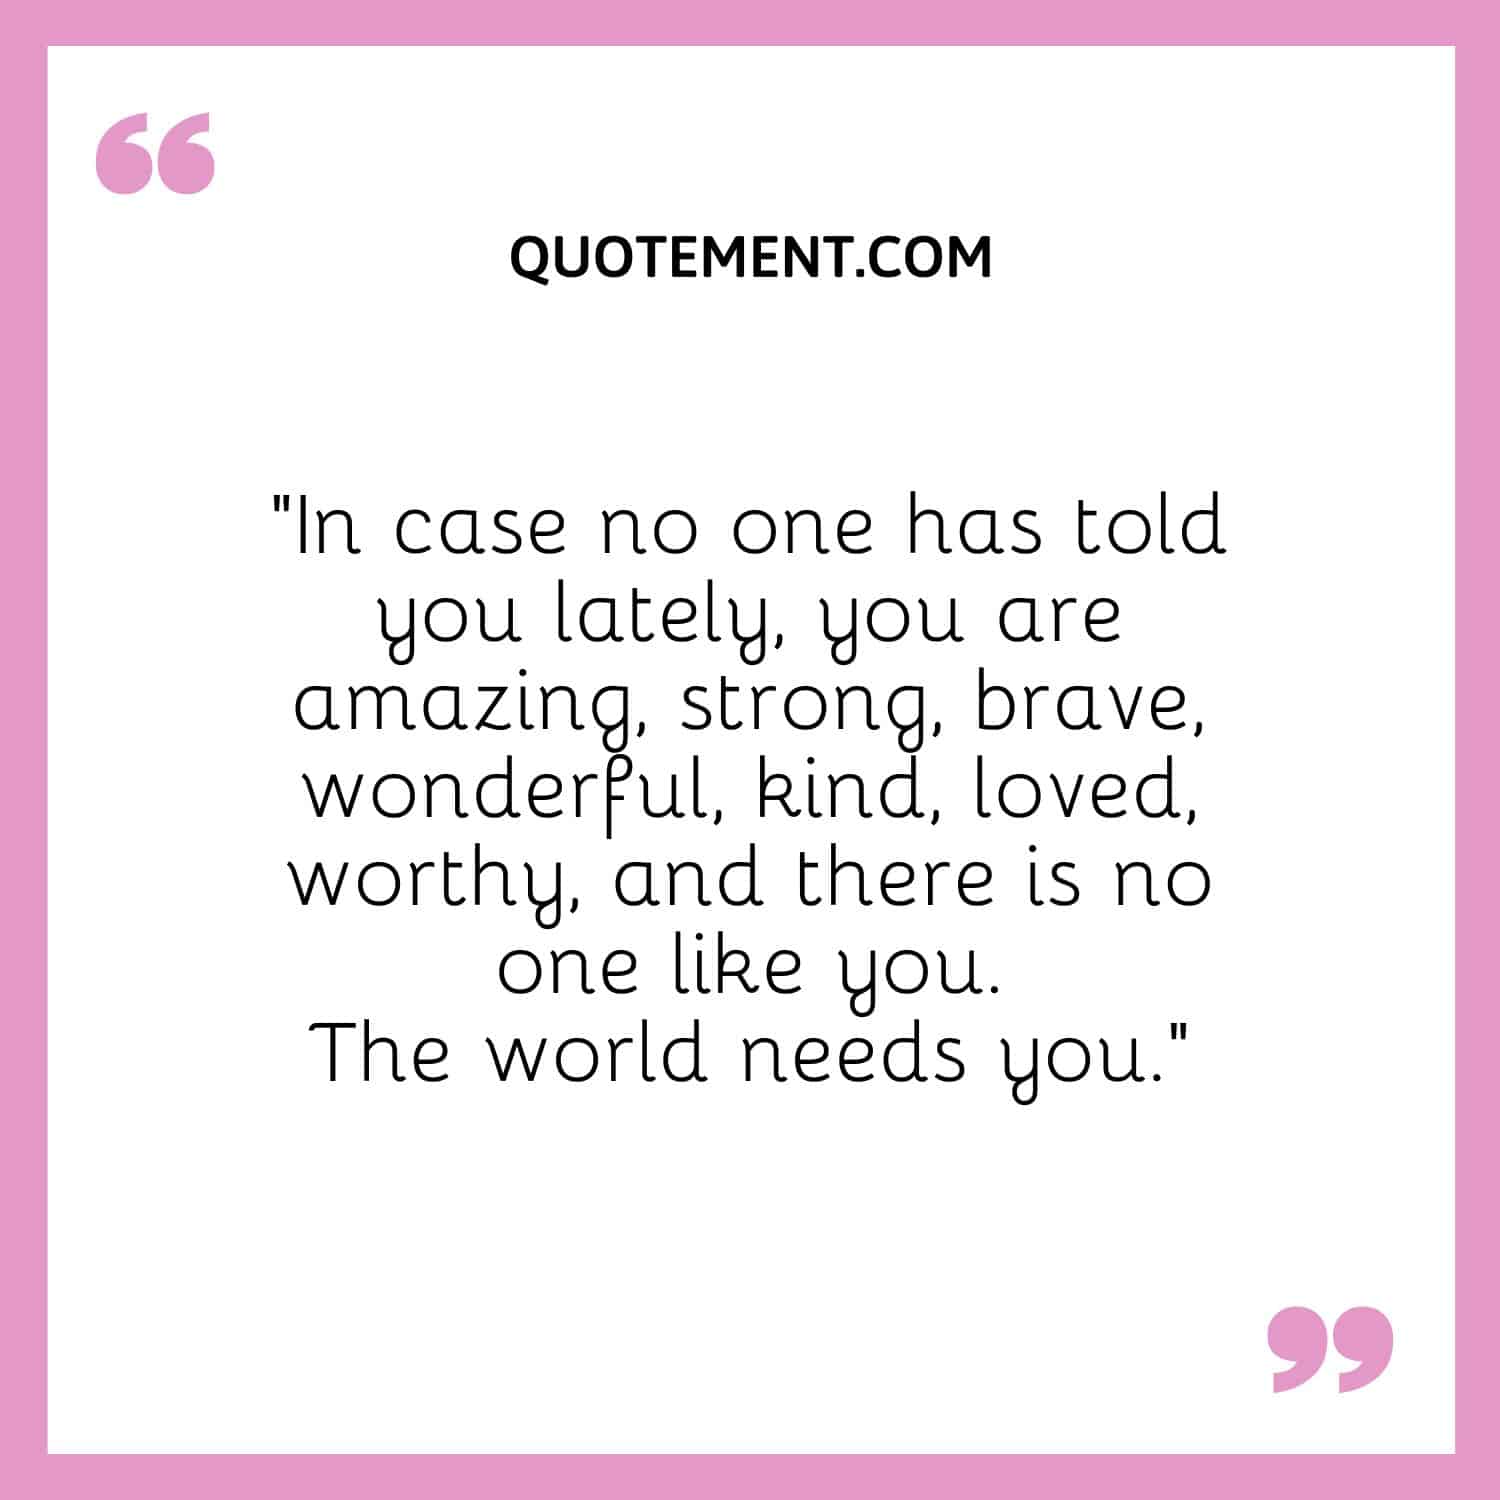 In case no one has told you lately, you are amazing, strong, brave